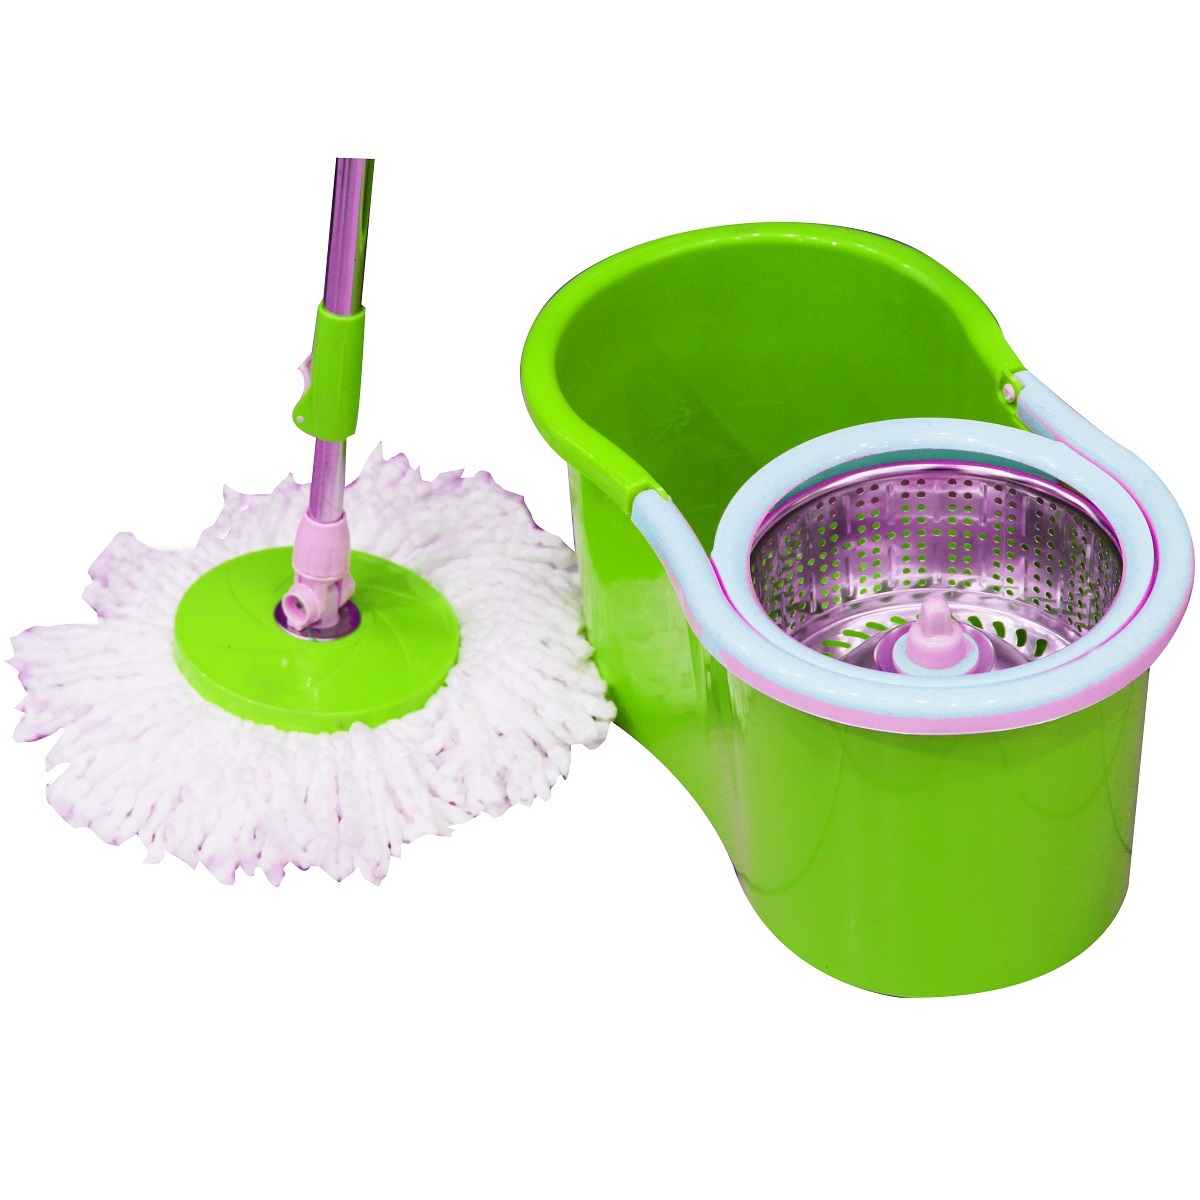 Lulu Spin Mop with Steel Tub LJD004